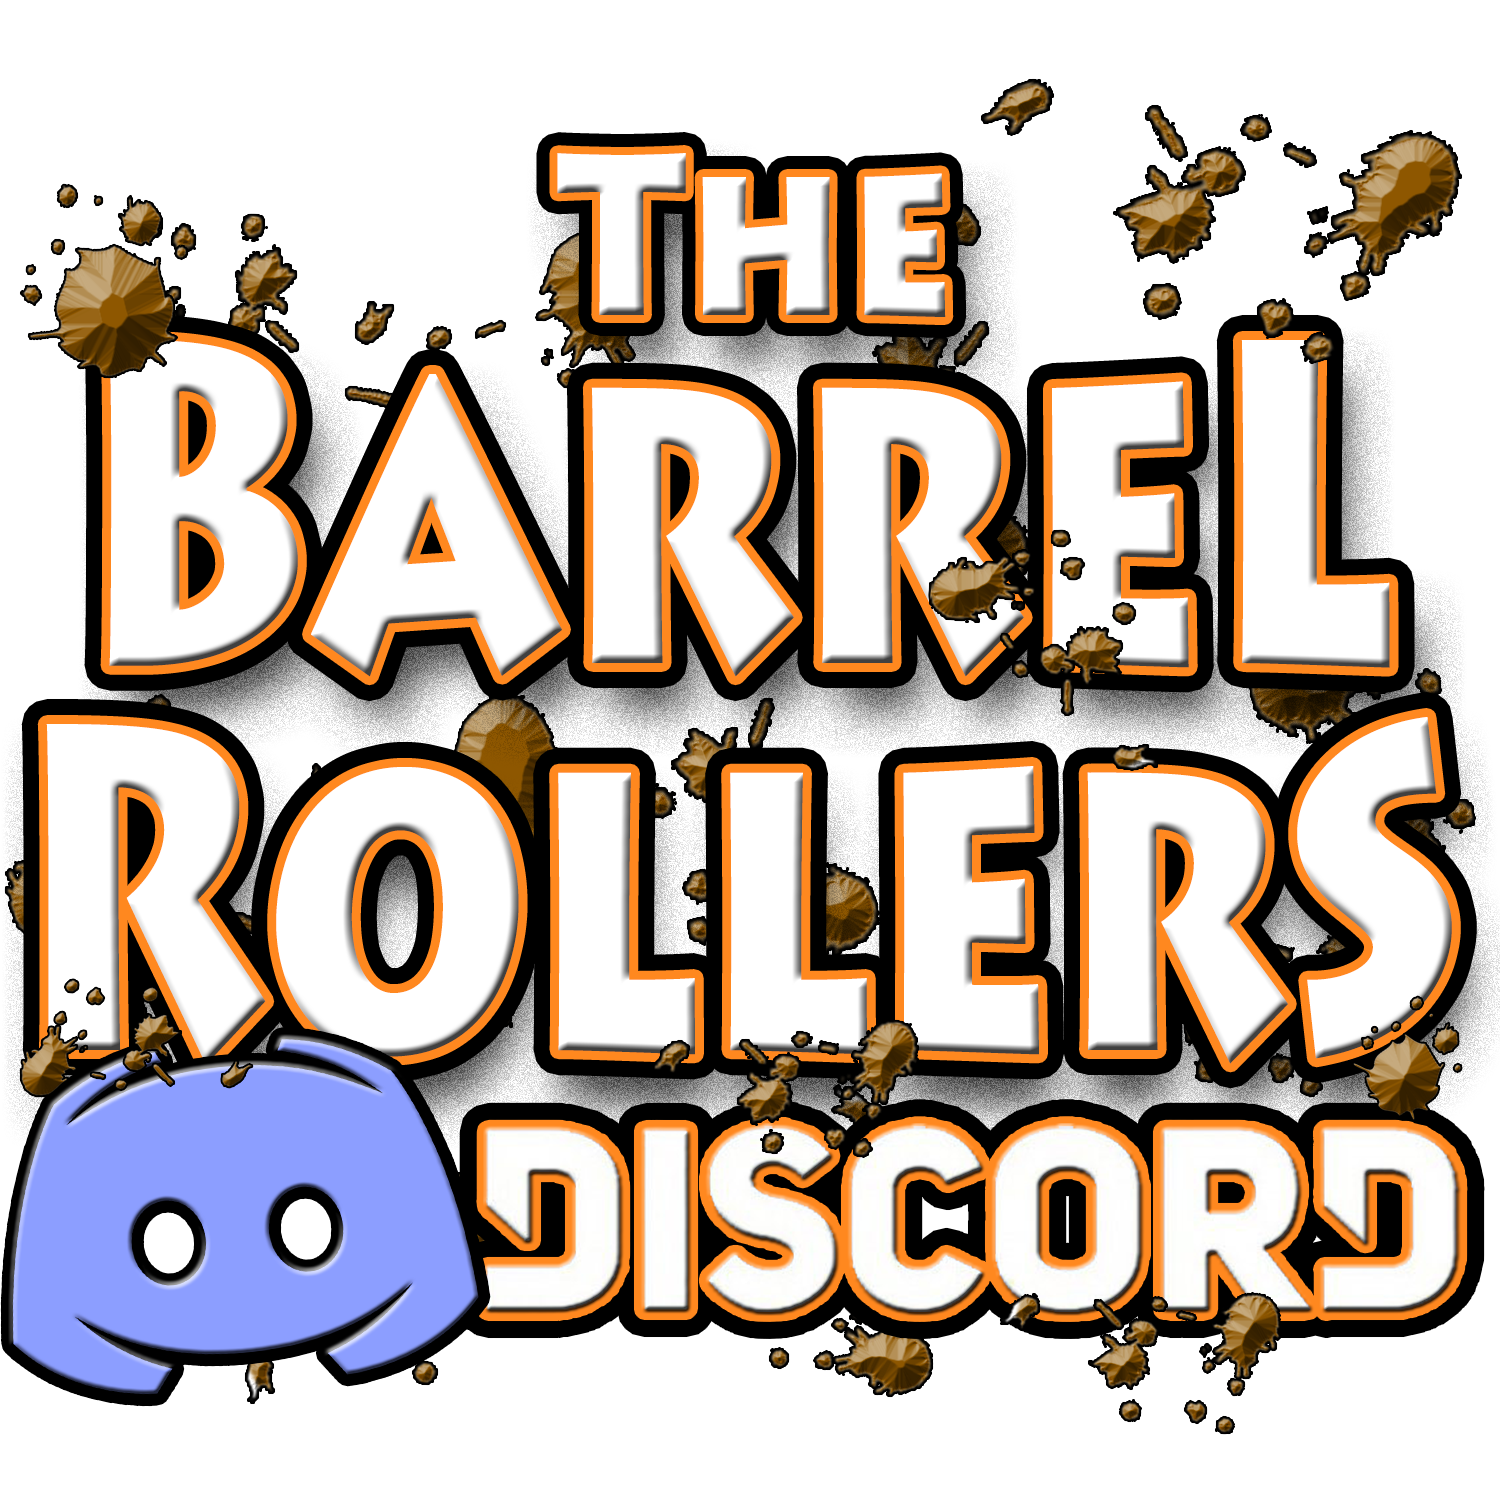 Barrel Rollers Discord Reference Image